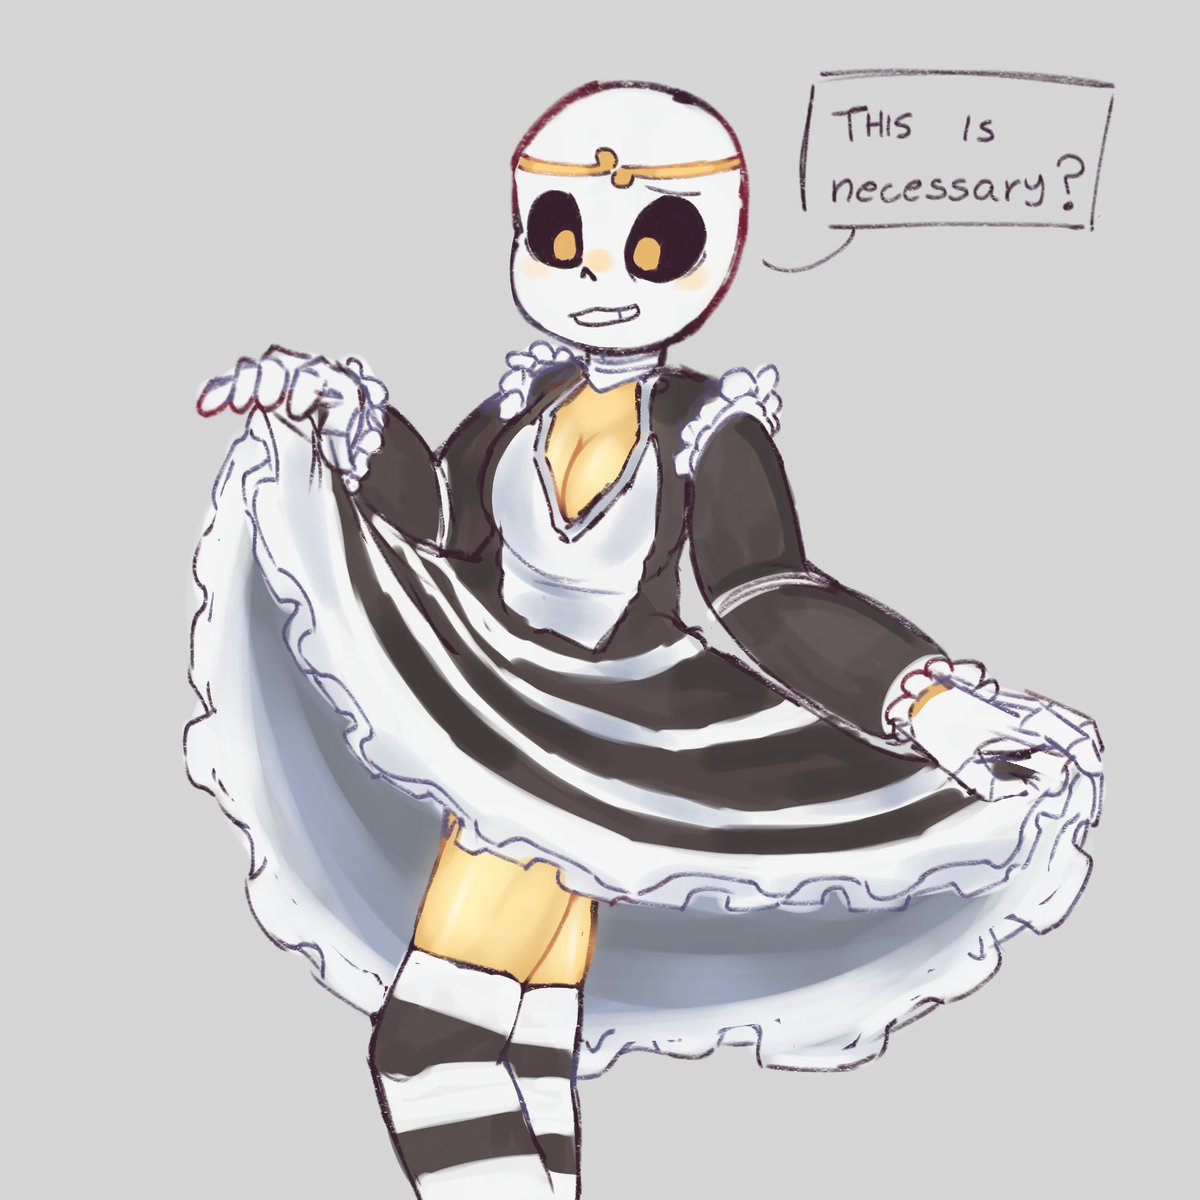 #Dreamsans And this dress? ><